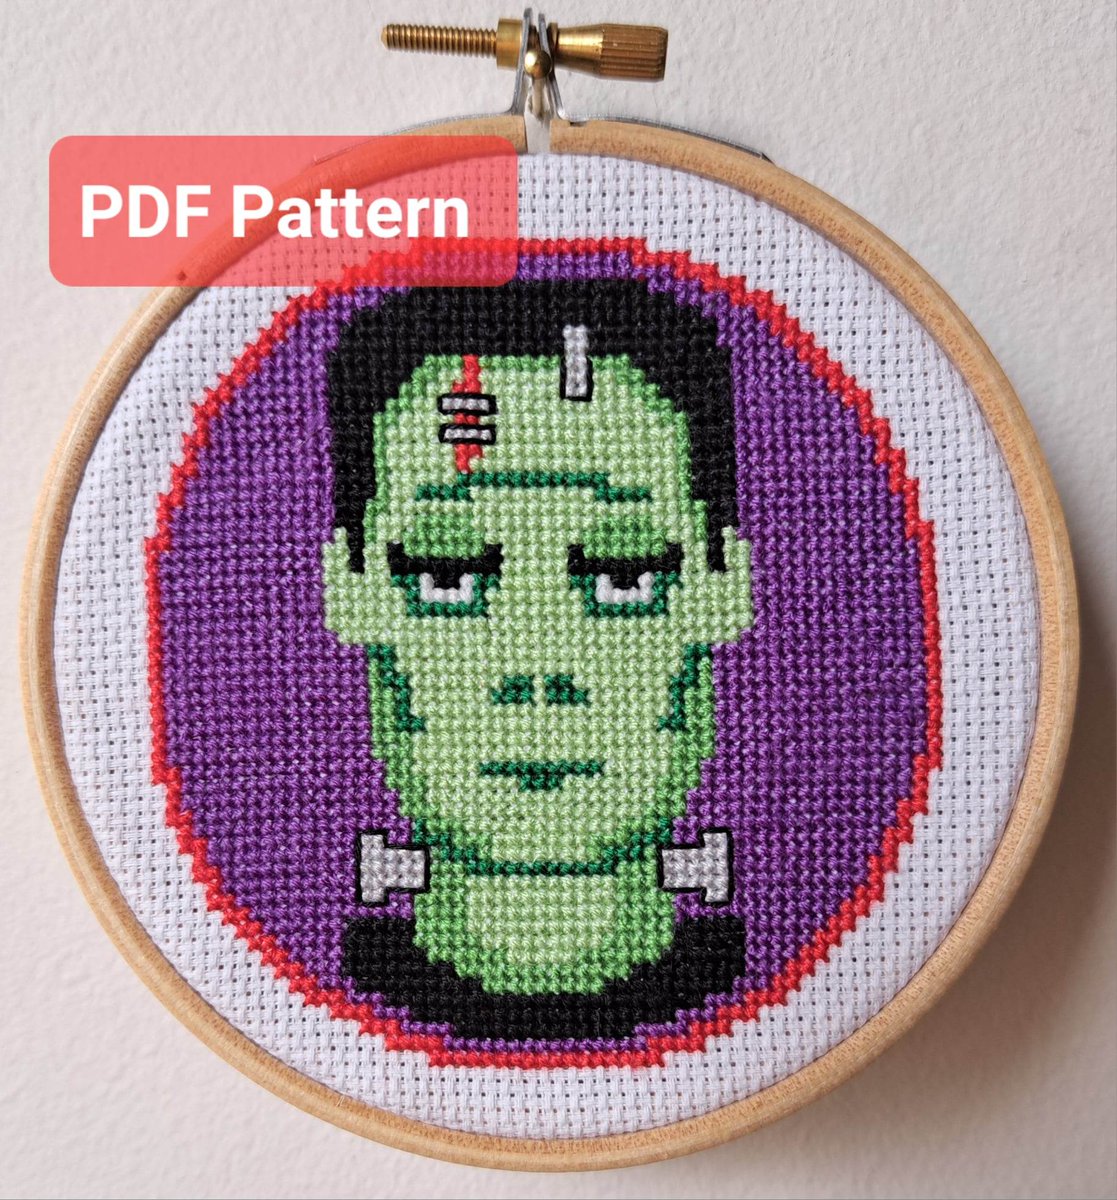 Frankensteins Monster PDF Pattern now available at our Etsy Store. 
etsy.com/uk/listing/146…
#halloween #frankensteinsmonster #horror #crossstitch #dmcthreads #embroidery